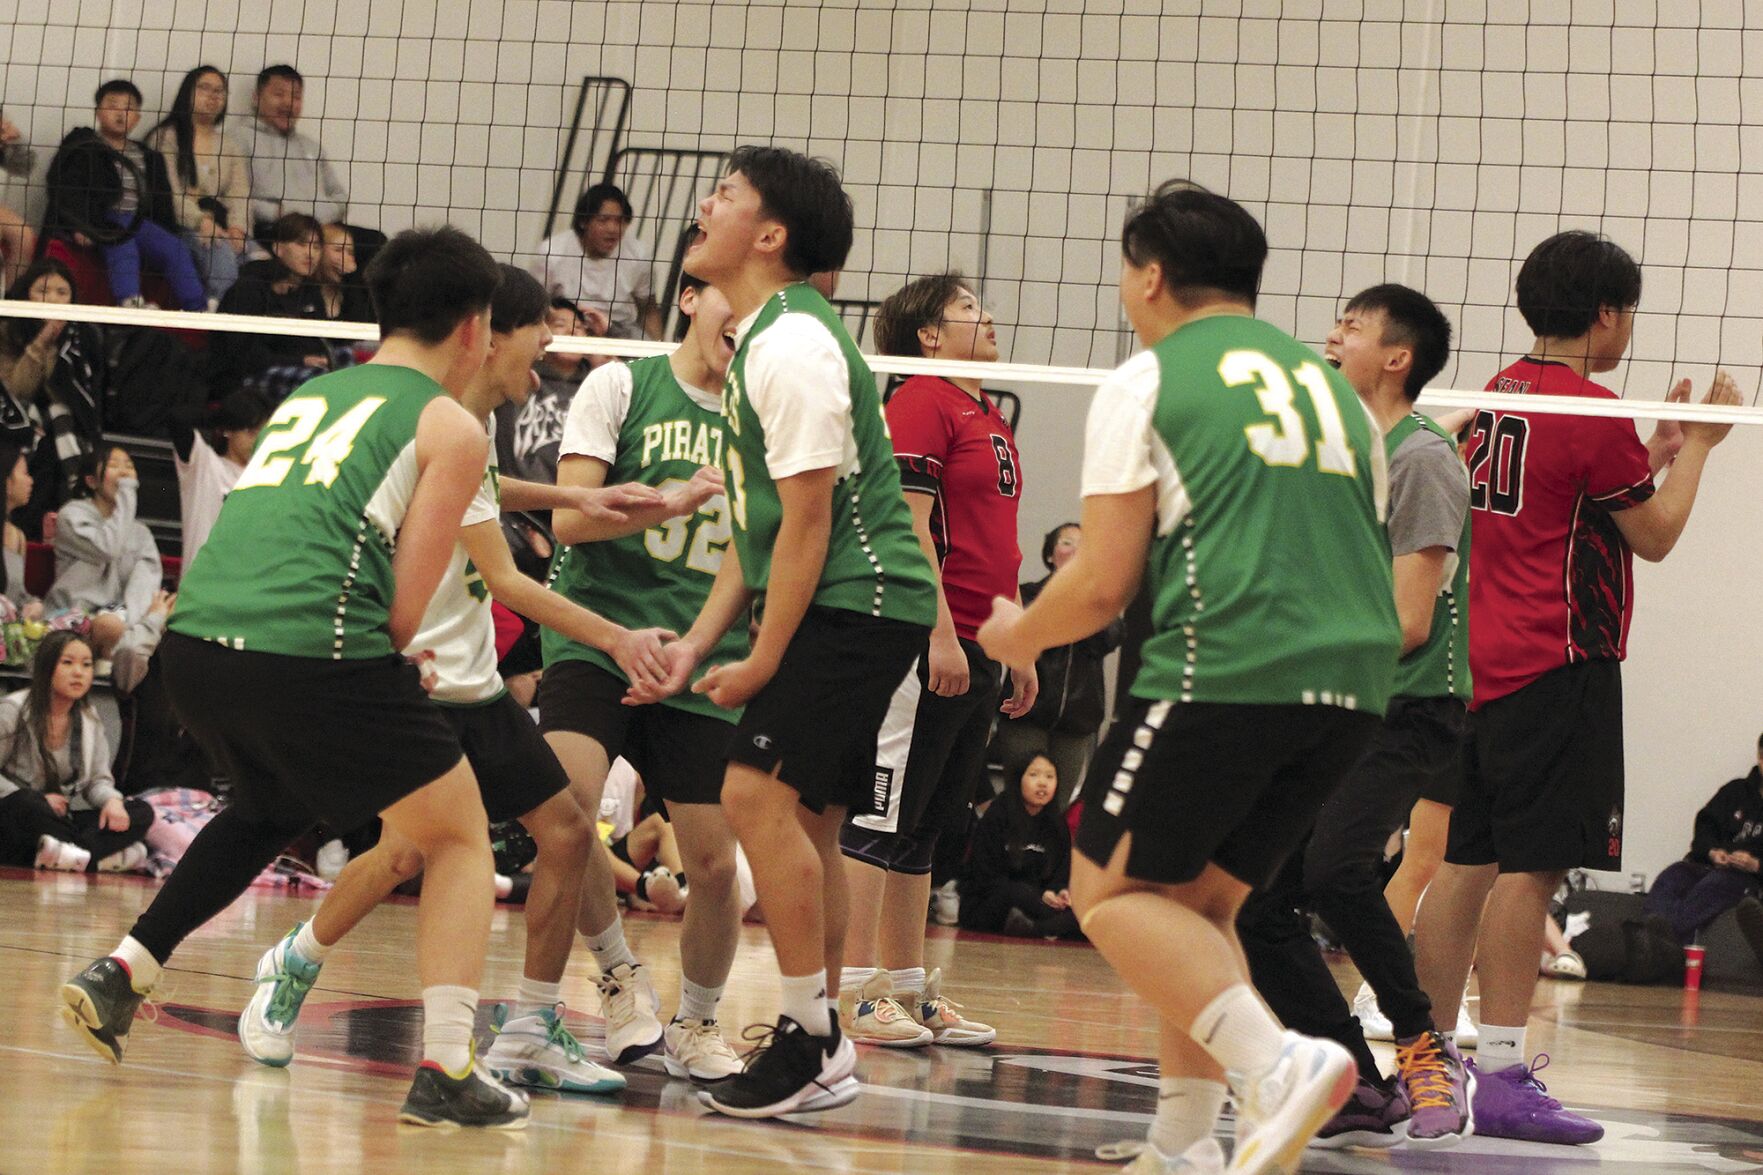 Pirates volleyball tops PSA in first win of season